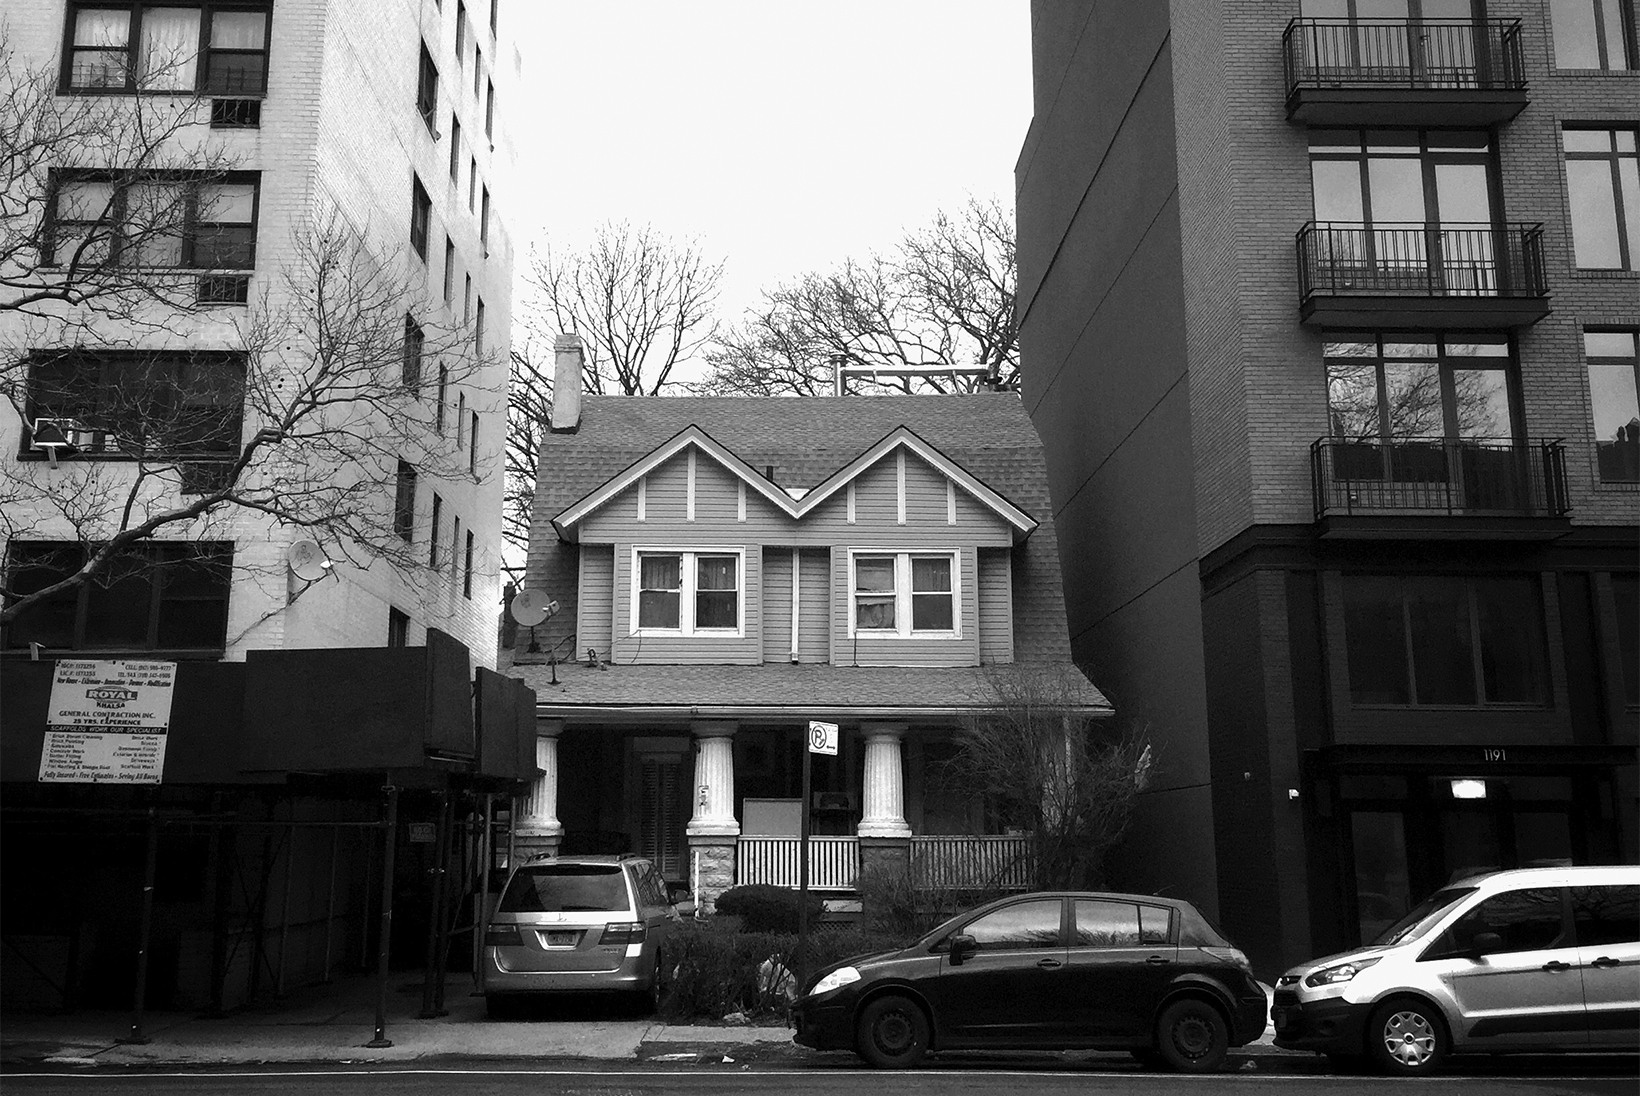 A small two-story house is sandwiched between two high-rise apartment buildings.